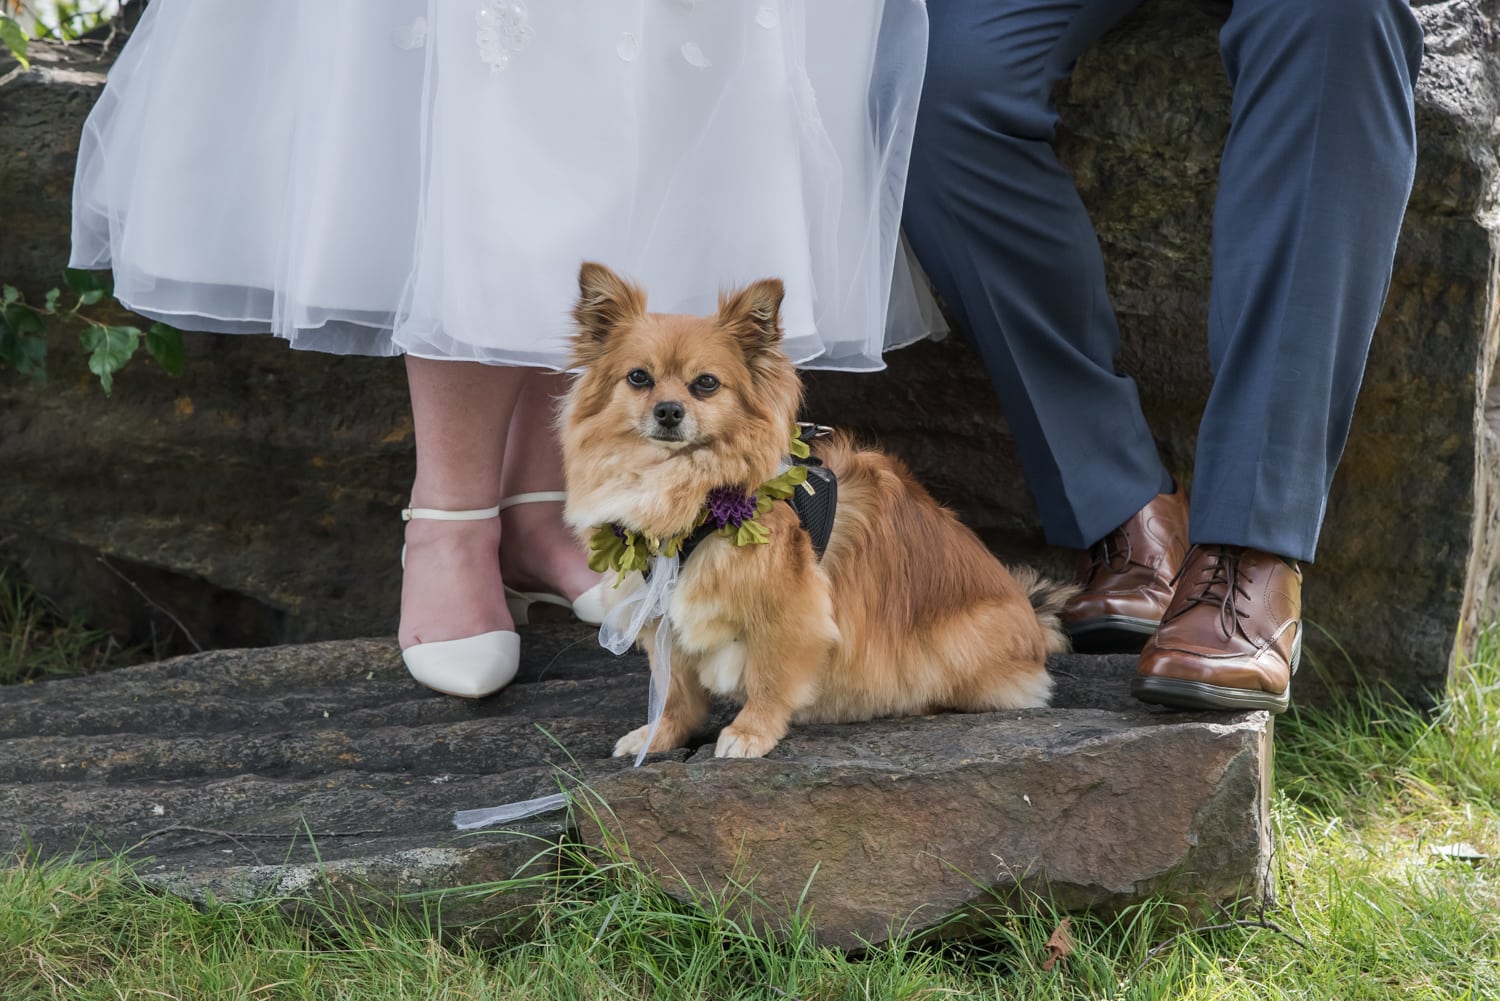 Dogs at Weddings, Yes or No?